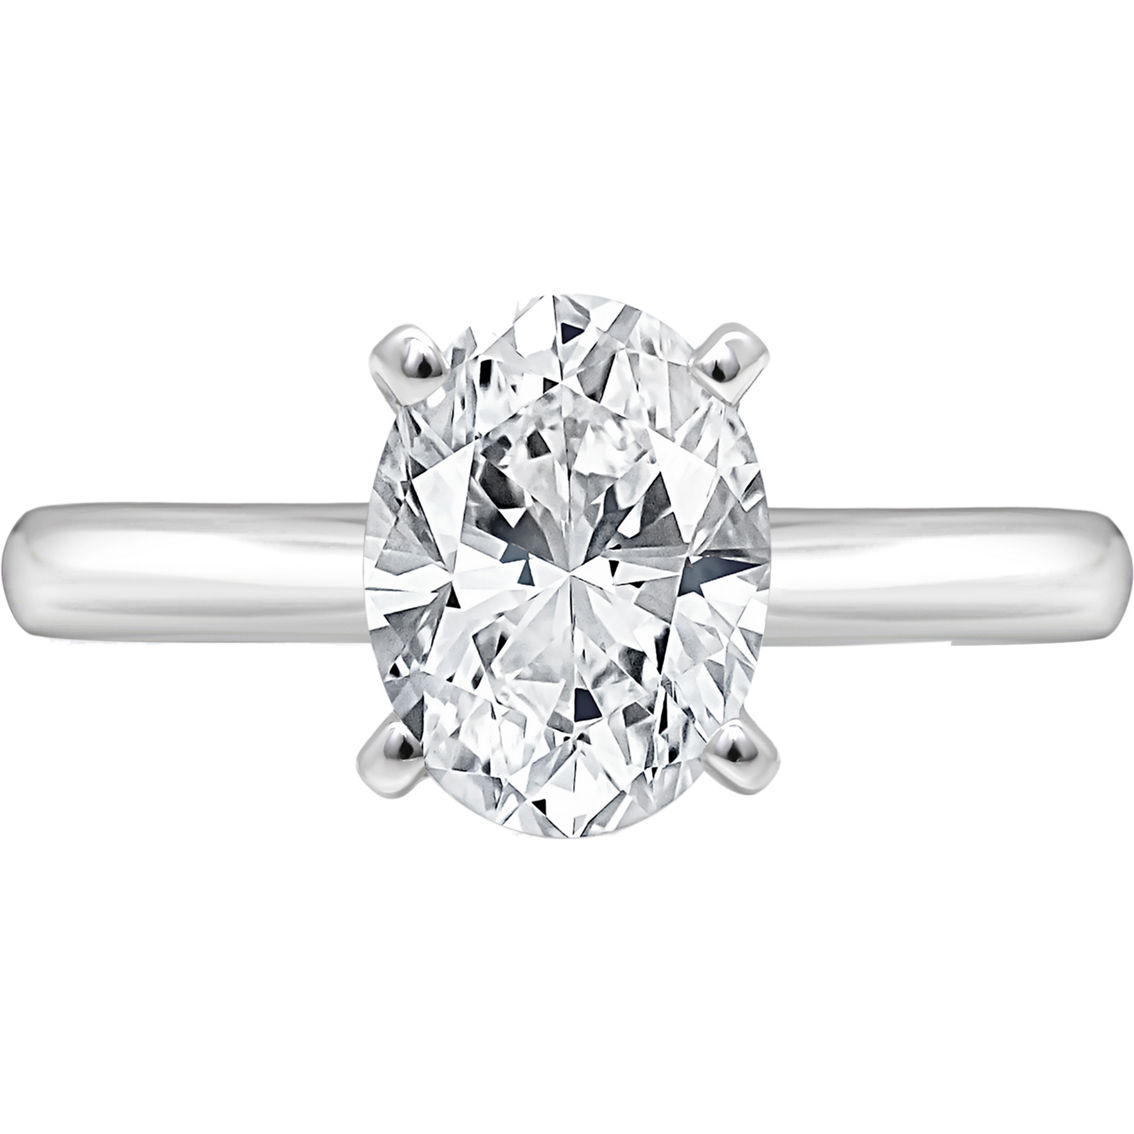 Ray of Brilliance 14K White Gold 3 CTW Lab Grown Oval Diamond Solitaire Ring - Image 4 of 4